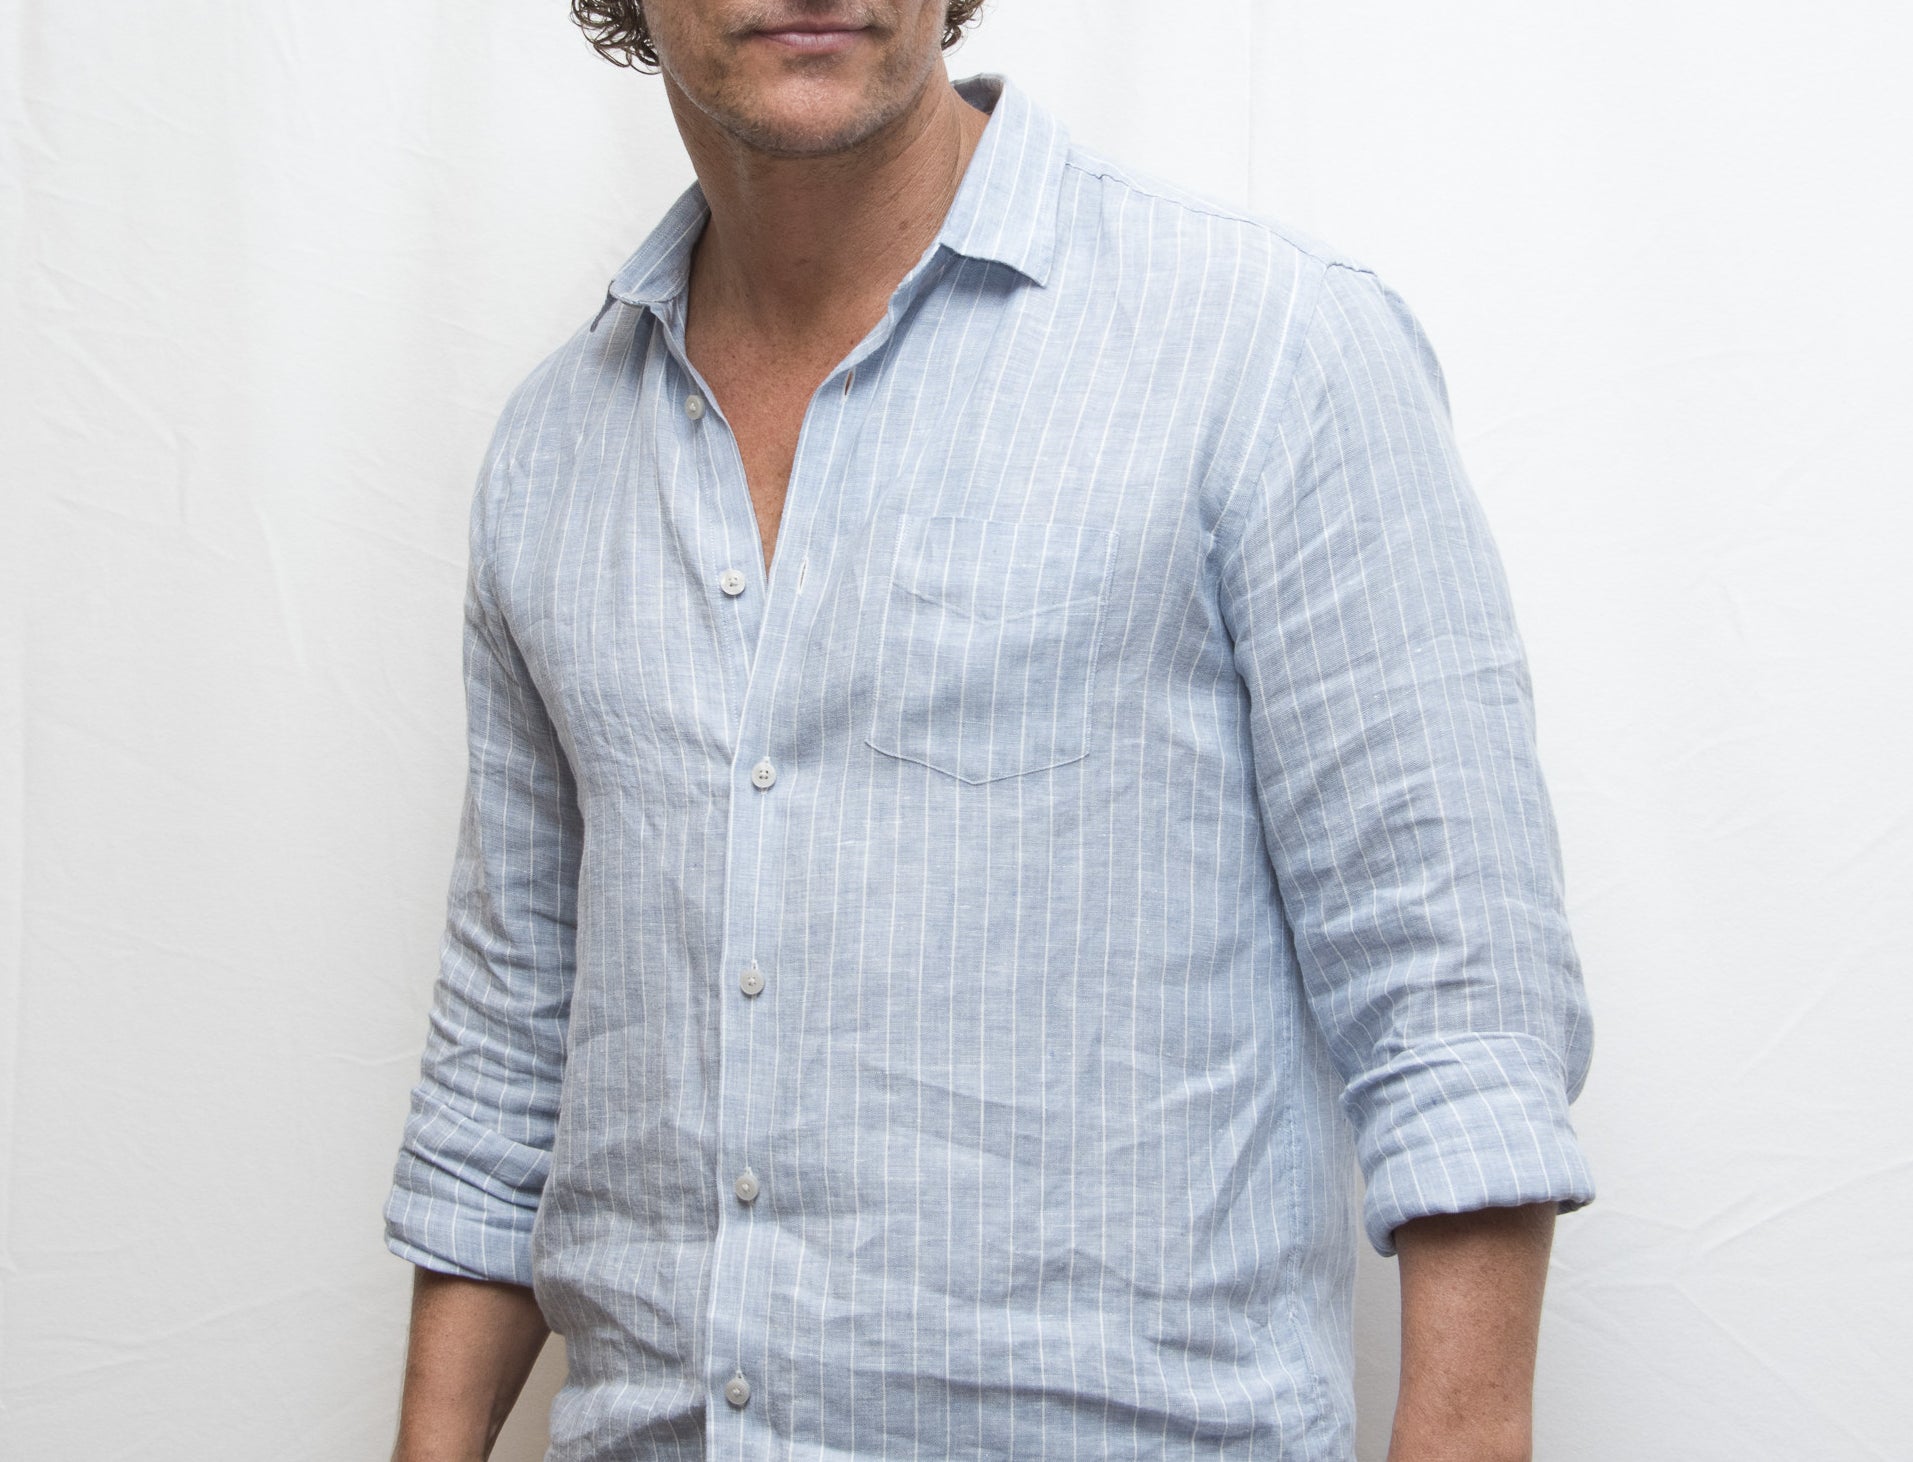 Matthew wears a blue button-down in front of a white backdrop